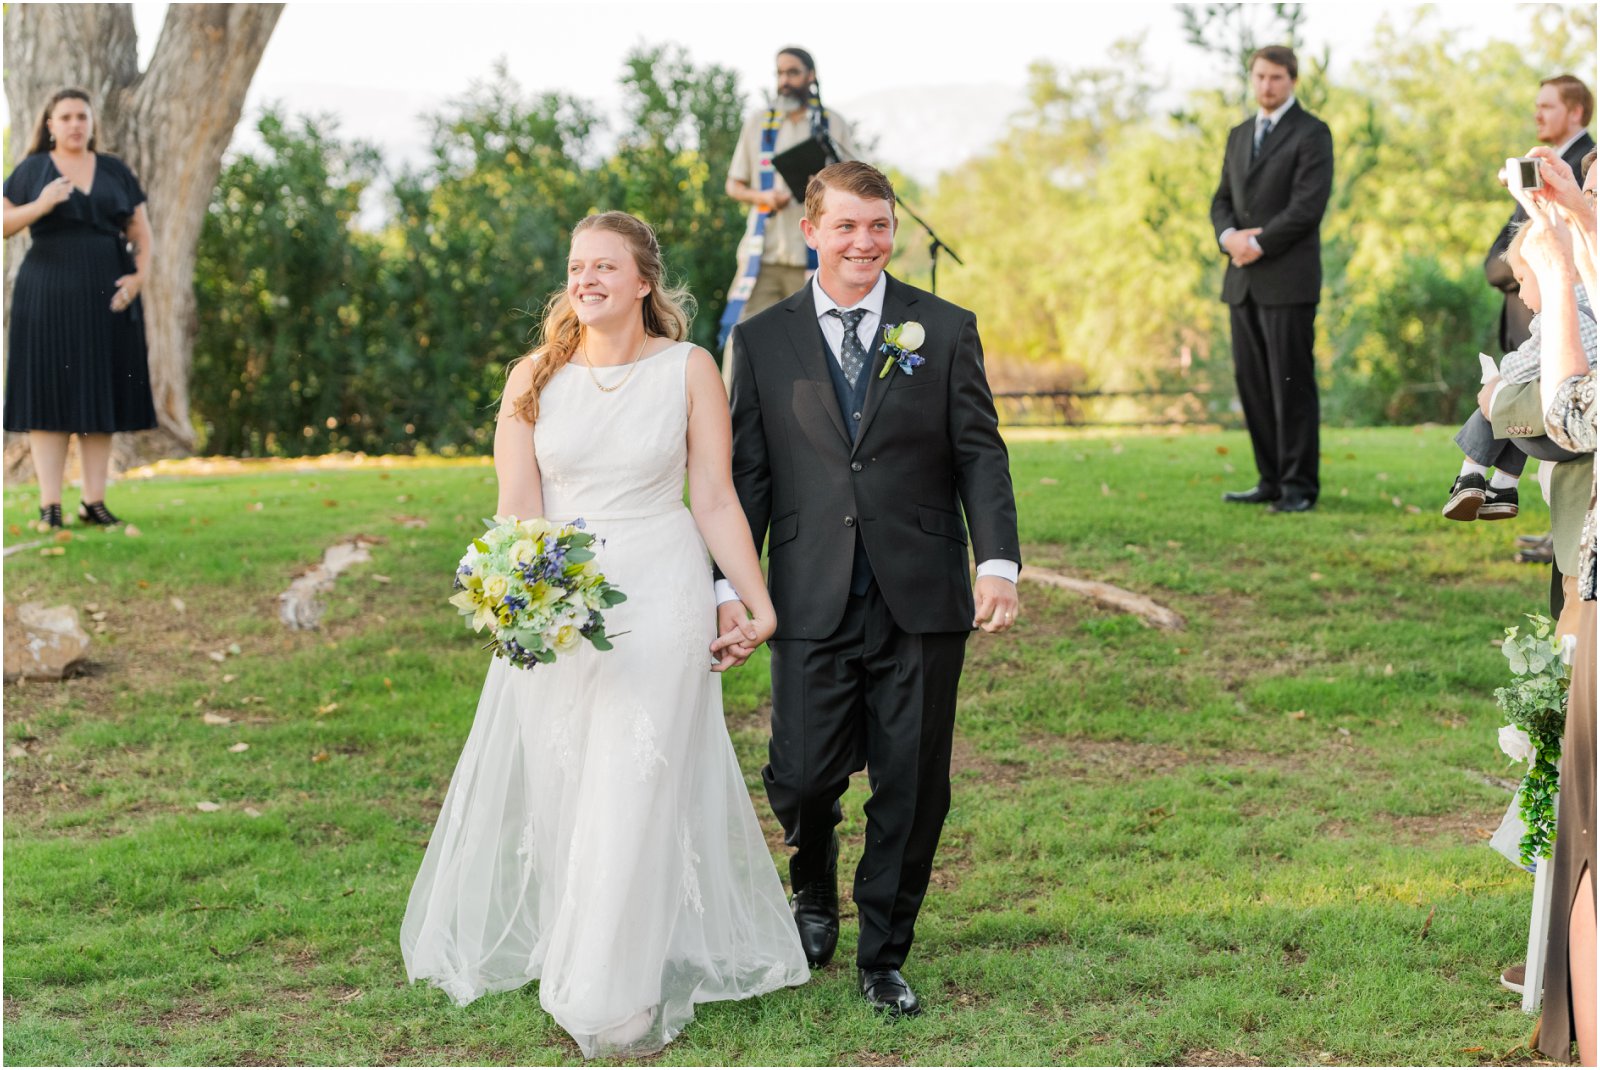 bride and groom walking down aisle together after ceremony at La Mariposa Tucson